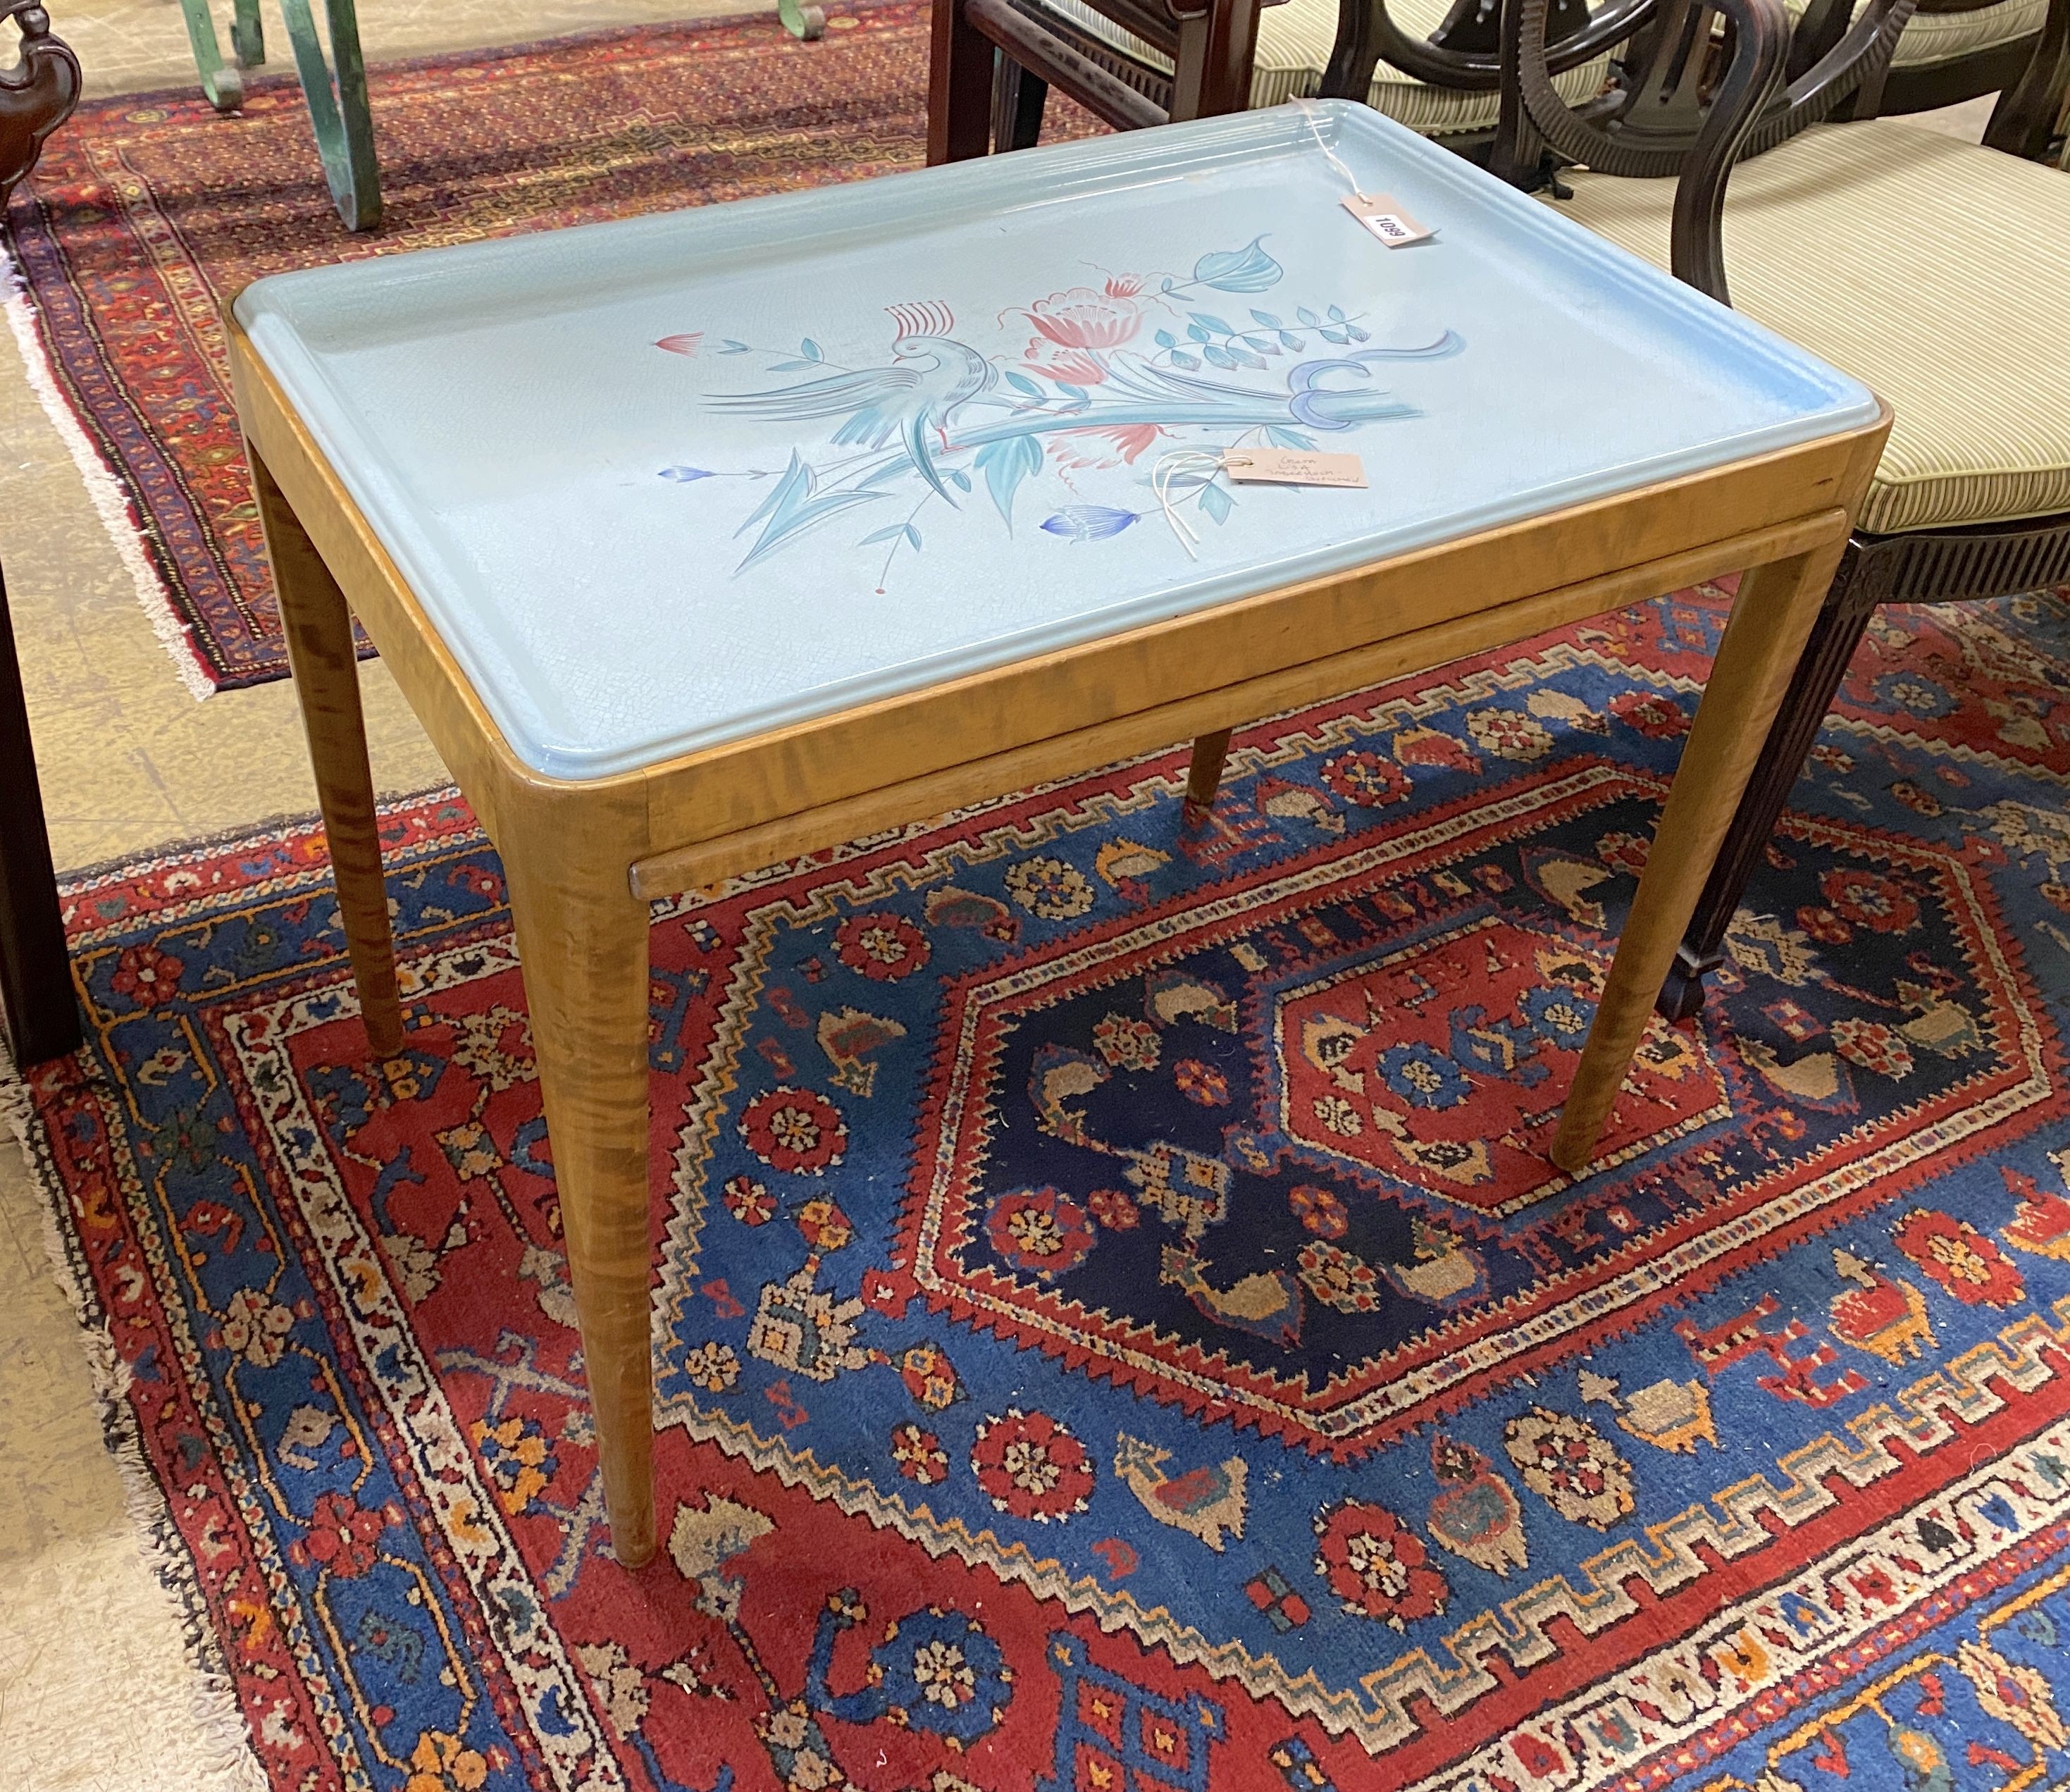 Greta Lisa Jaderholm - Snellman. A Finnish Arabia pottery rectangular tray top table with slide out sides, width 78cm, depth 49cm, height 60cm